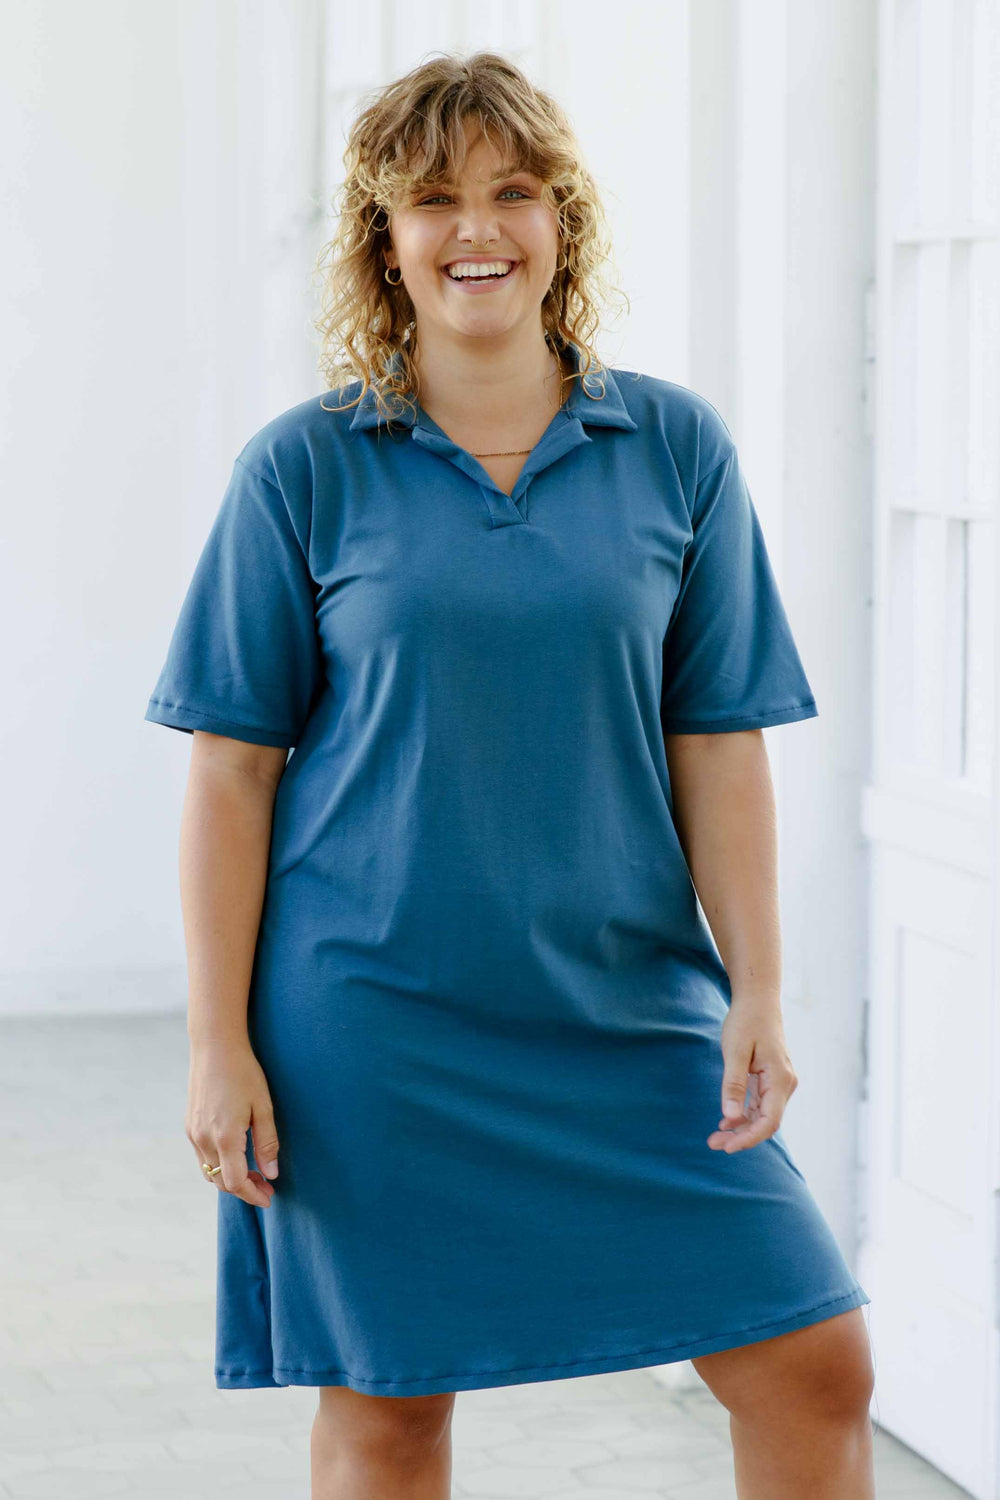 Woman wearing the Harper Polo Dress sewing pattern from JULIANA MARTEJEVS on The Fold Line. A dress pattern made in cotton jersey knit fabric, featuring a classic polo collar, short sleeves, and side slits.